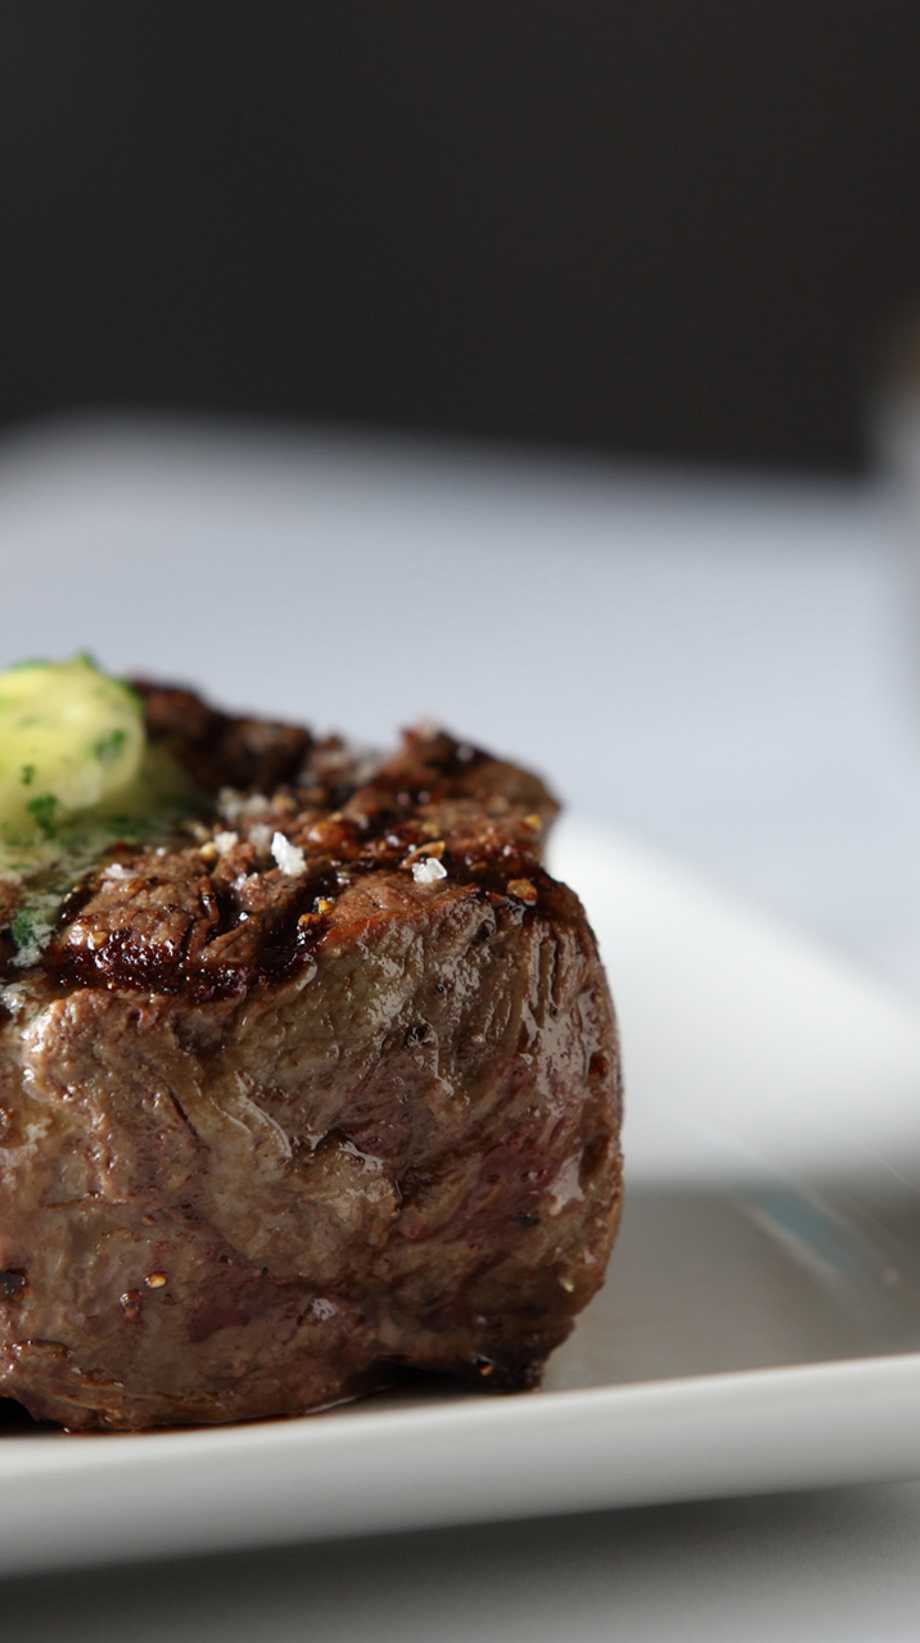 Butter is melting on top of a thick cut of steak, resting on a white plate.